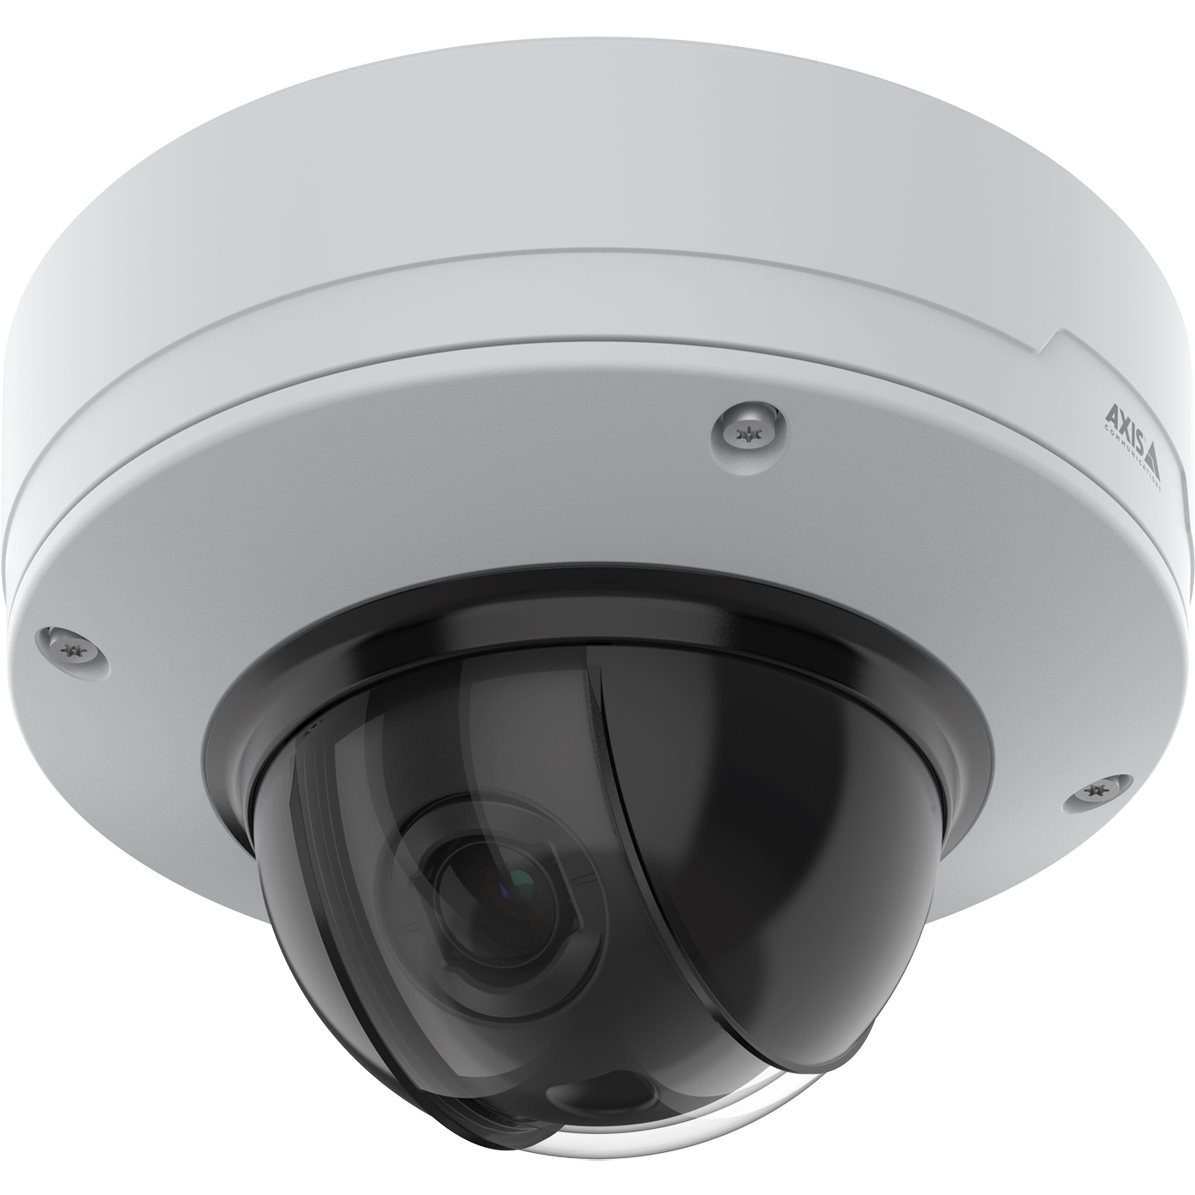 Camra Axis Q3536-LVE 29MM DOME CAMERA 02224-001